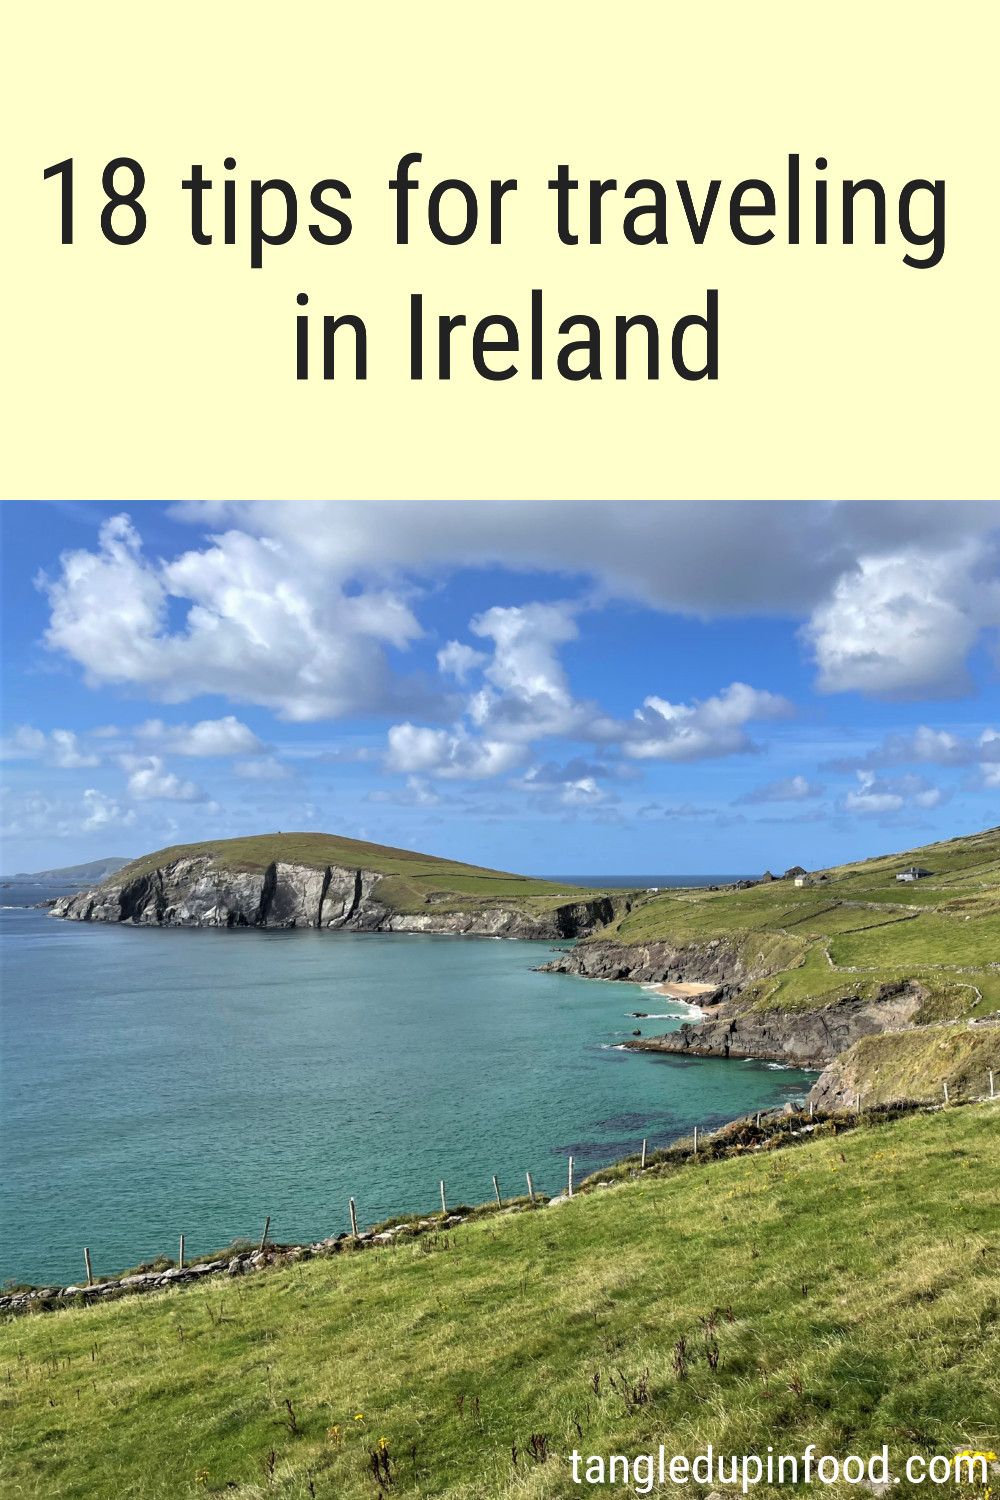 Picture of rolling green hills and rocky coastline with text reading "18 tips for traveling in Ireland"